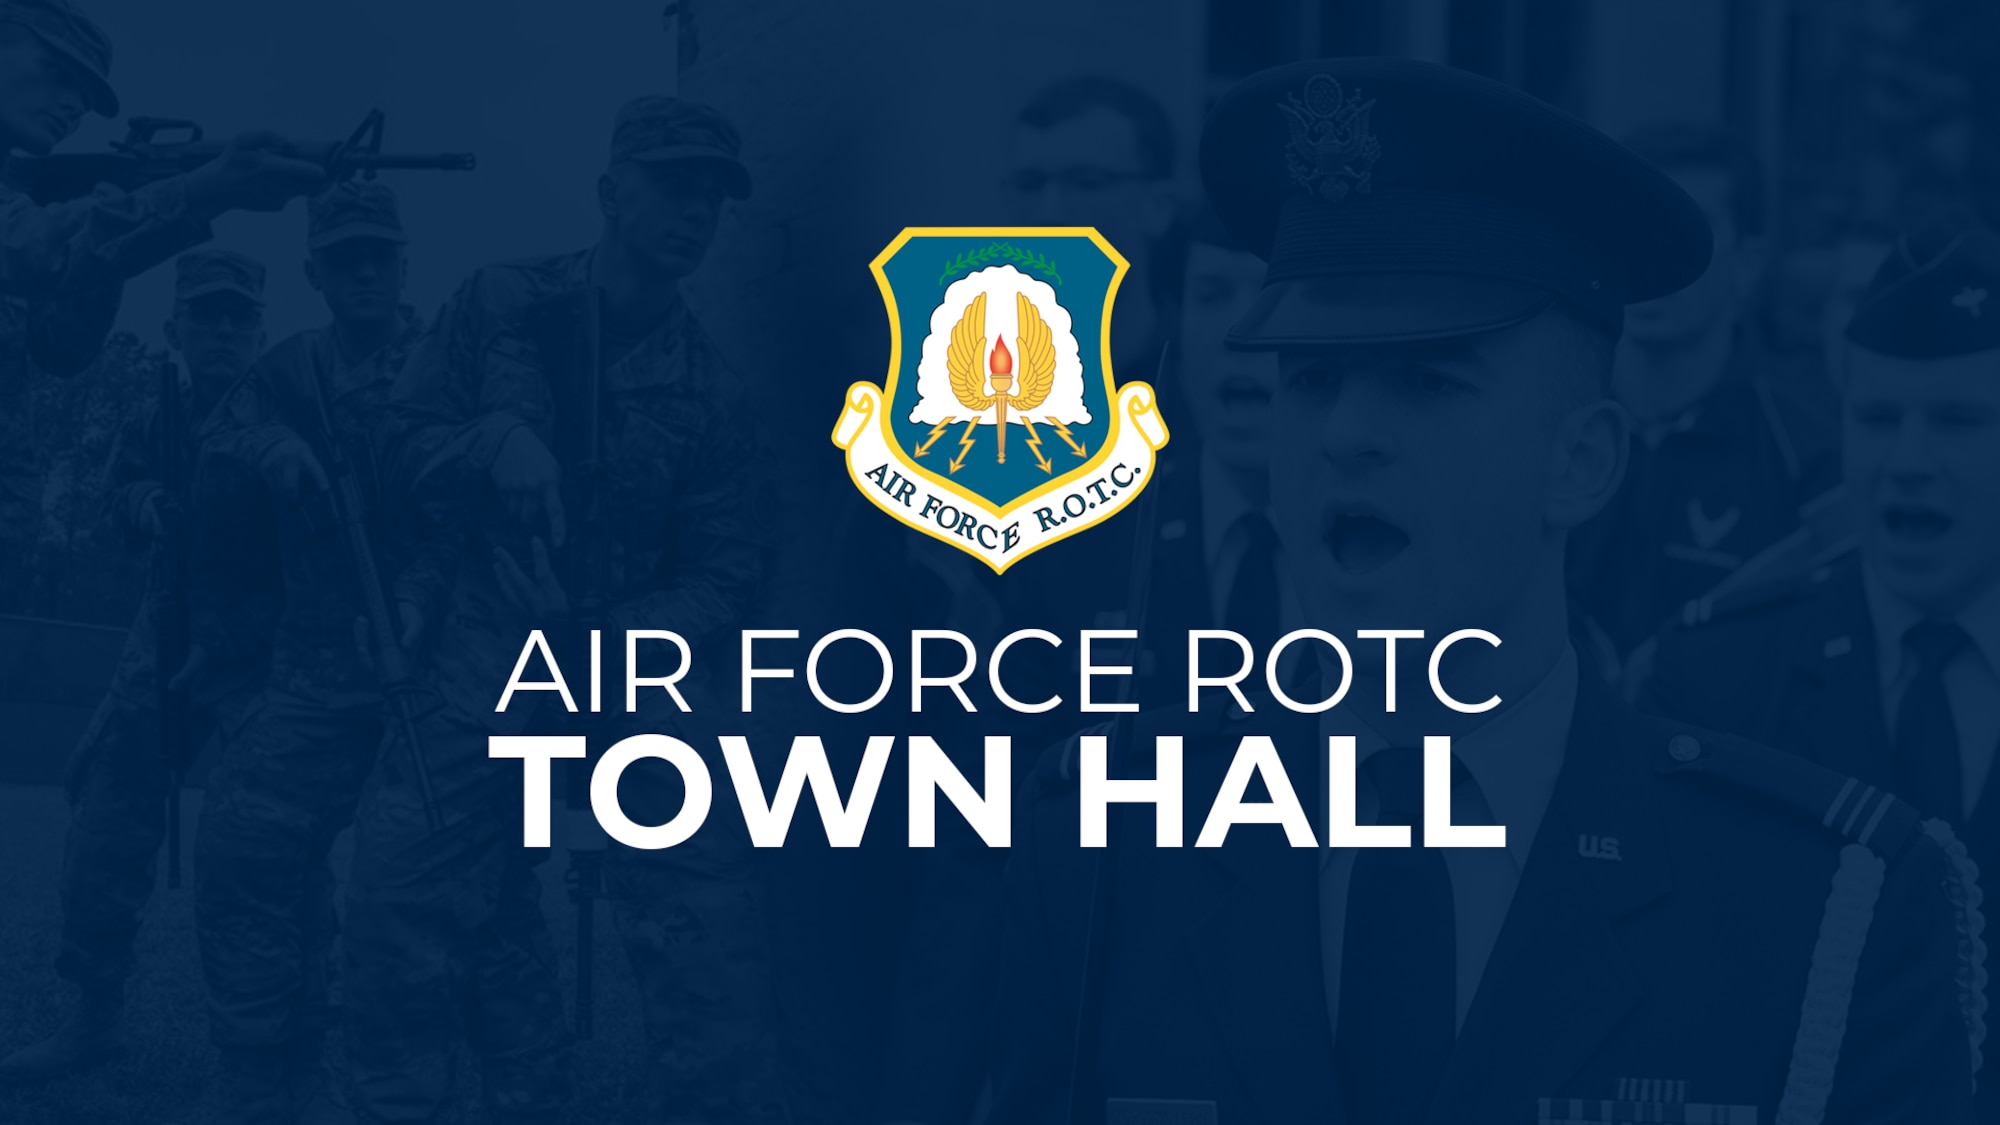 Air Force Reserve Officer Training Corps leadership discussed the future of the program and answered questions during a virtual town hall, June 18, 2020, live on Air University’s Facebook. (U.S. Air Force graphic by Senior Airman Charles Welty)